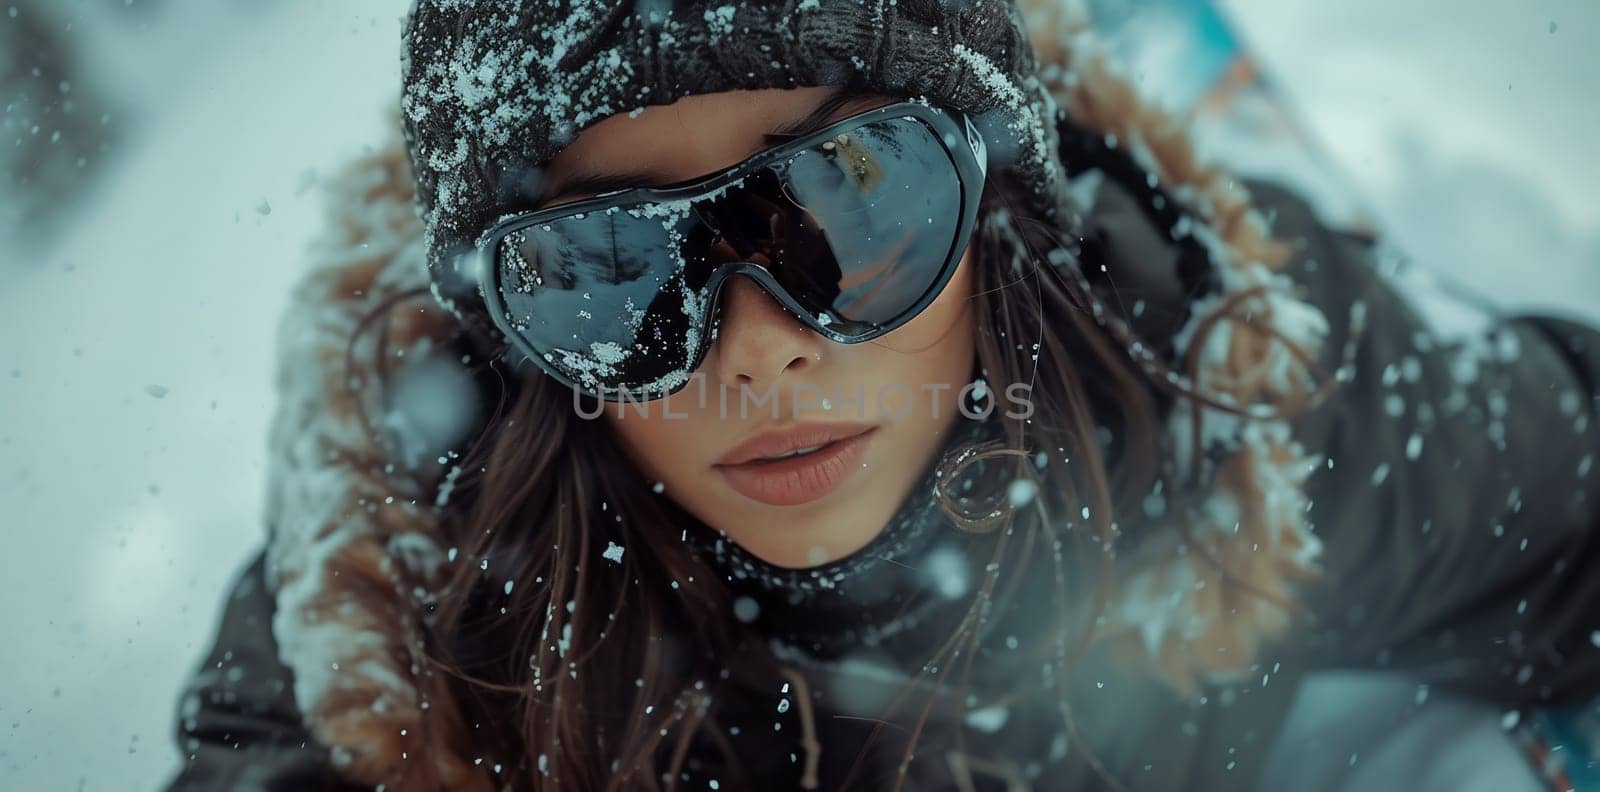 Attractive young woman in wintertime outdoor. Fashion model in winter clothing - Image by Andelov13